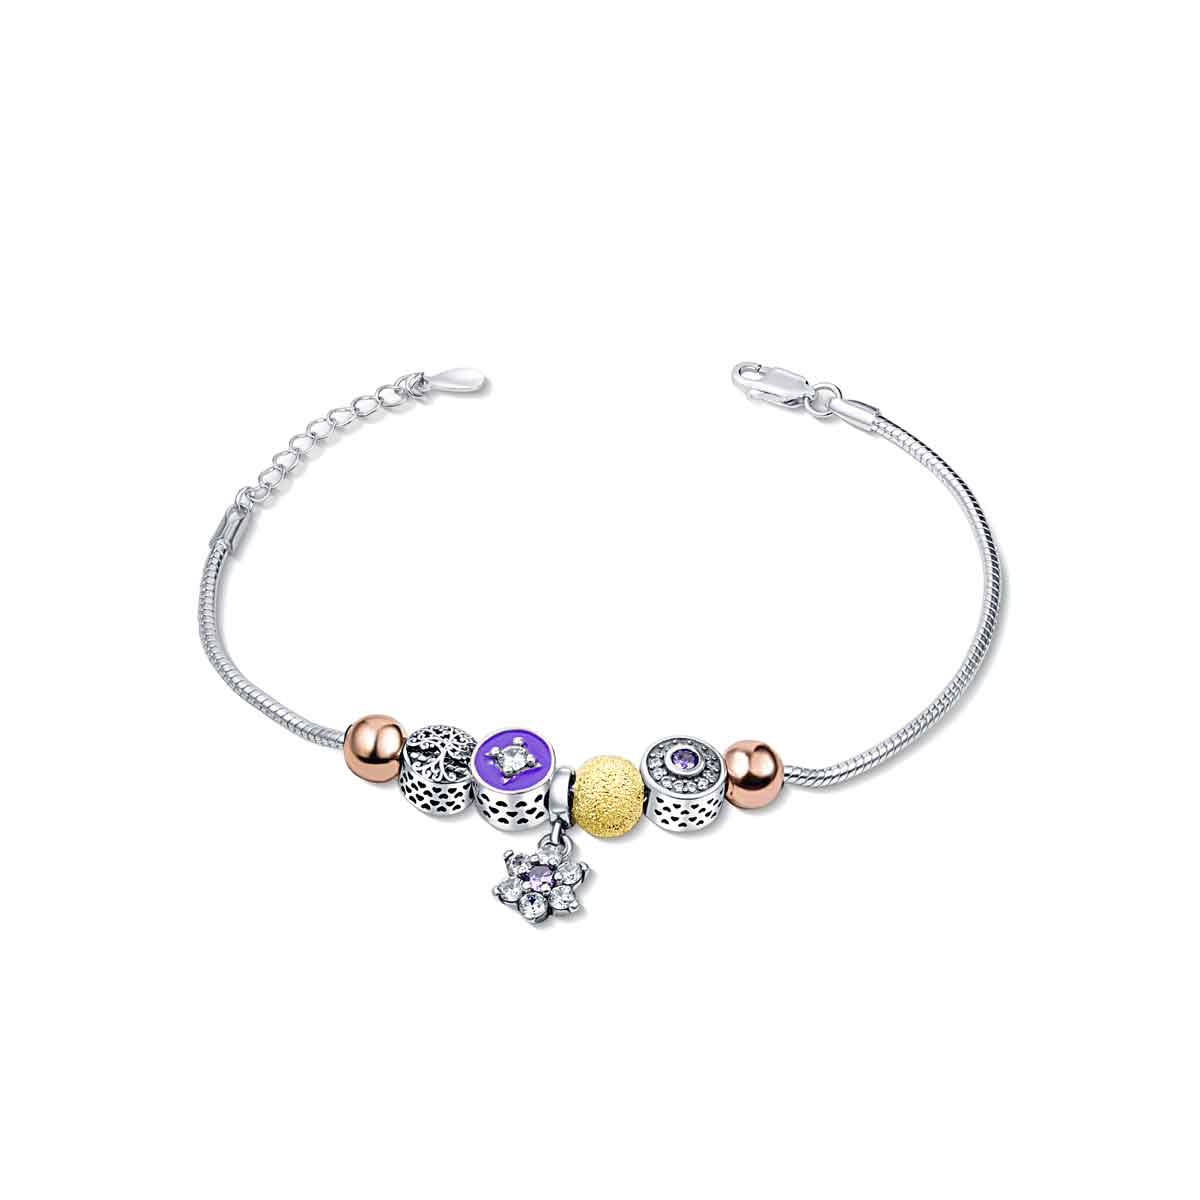 Elevate your style with Raajraani's stunning 925 sterling silver bracelet. Featuring a beautiful multi-finish design, this comfortable bracelet is the perfect addition to any outfit. Shop now and shine in silver!